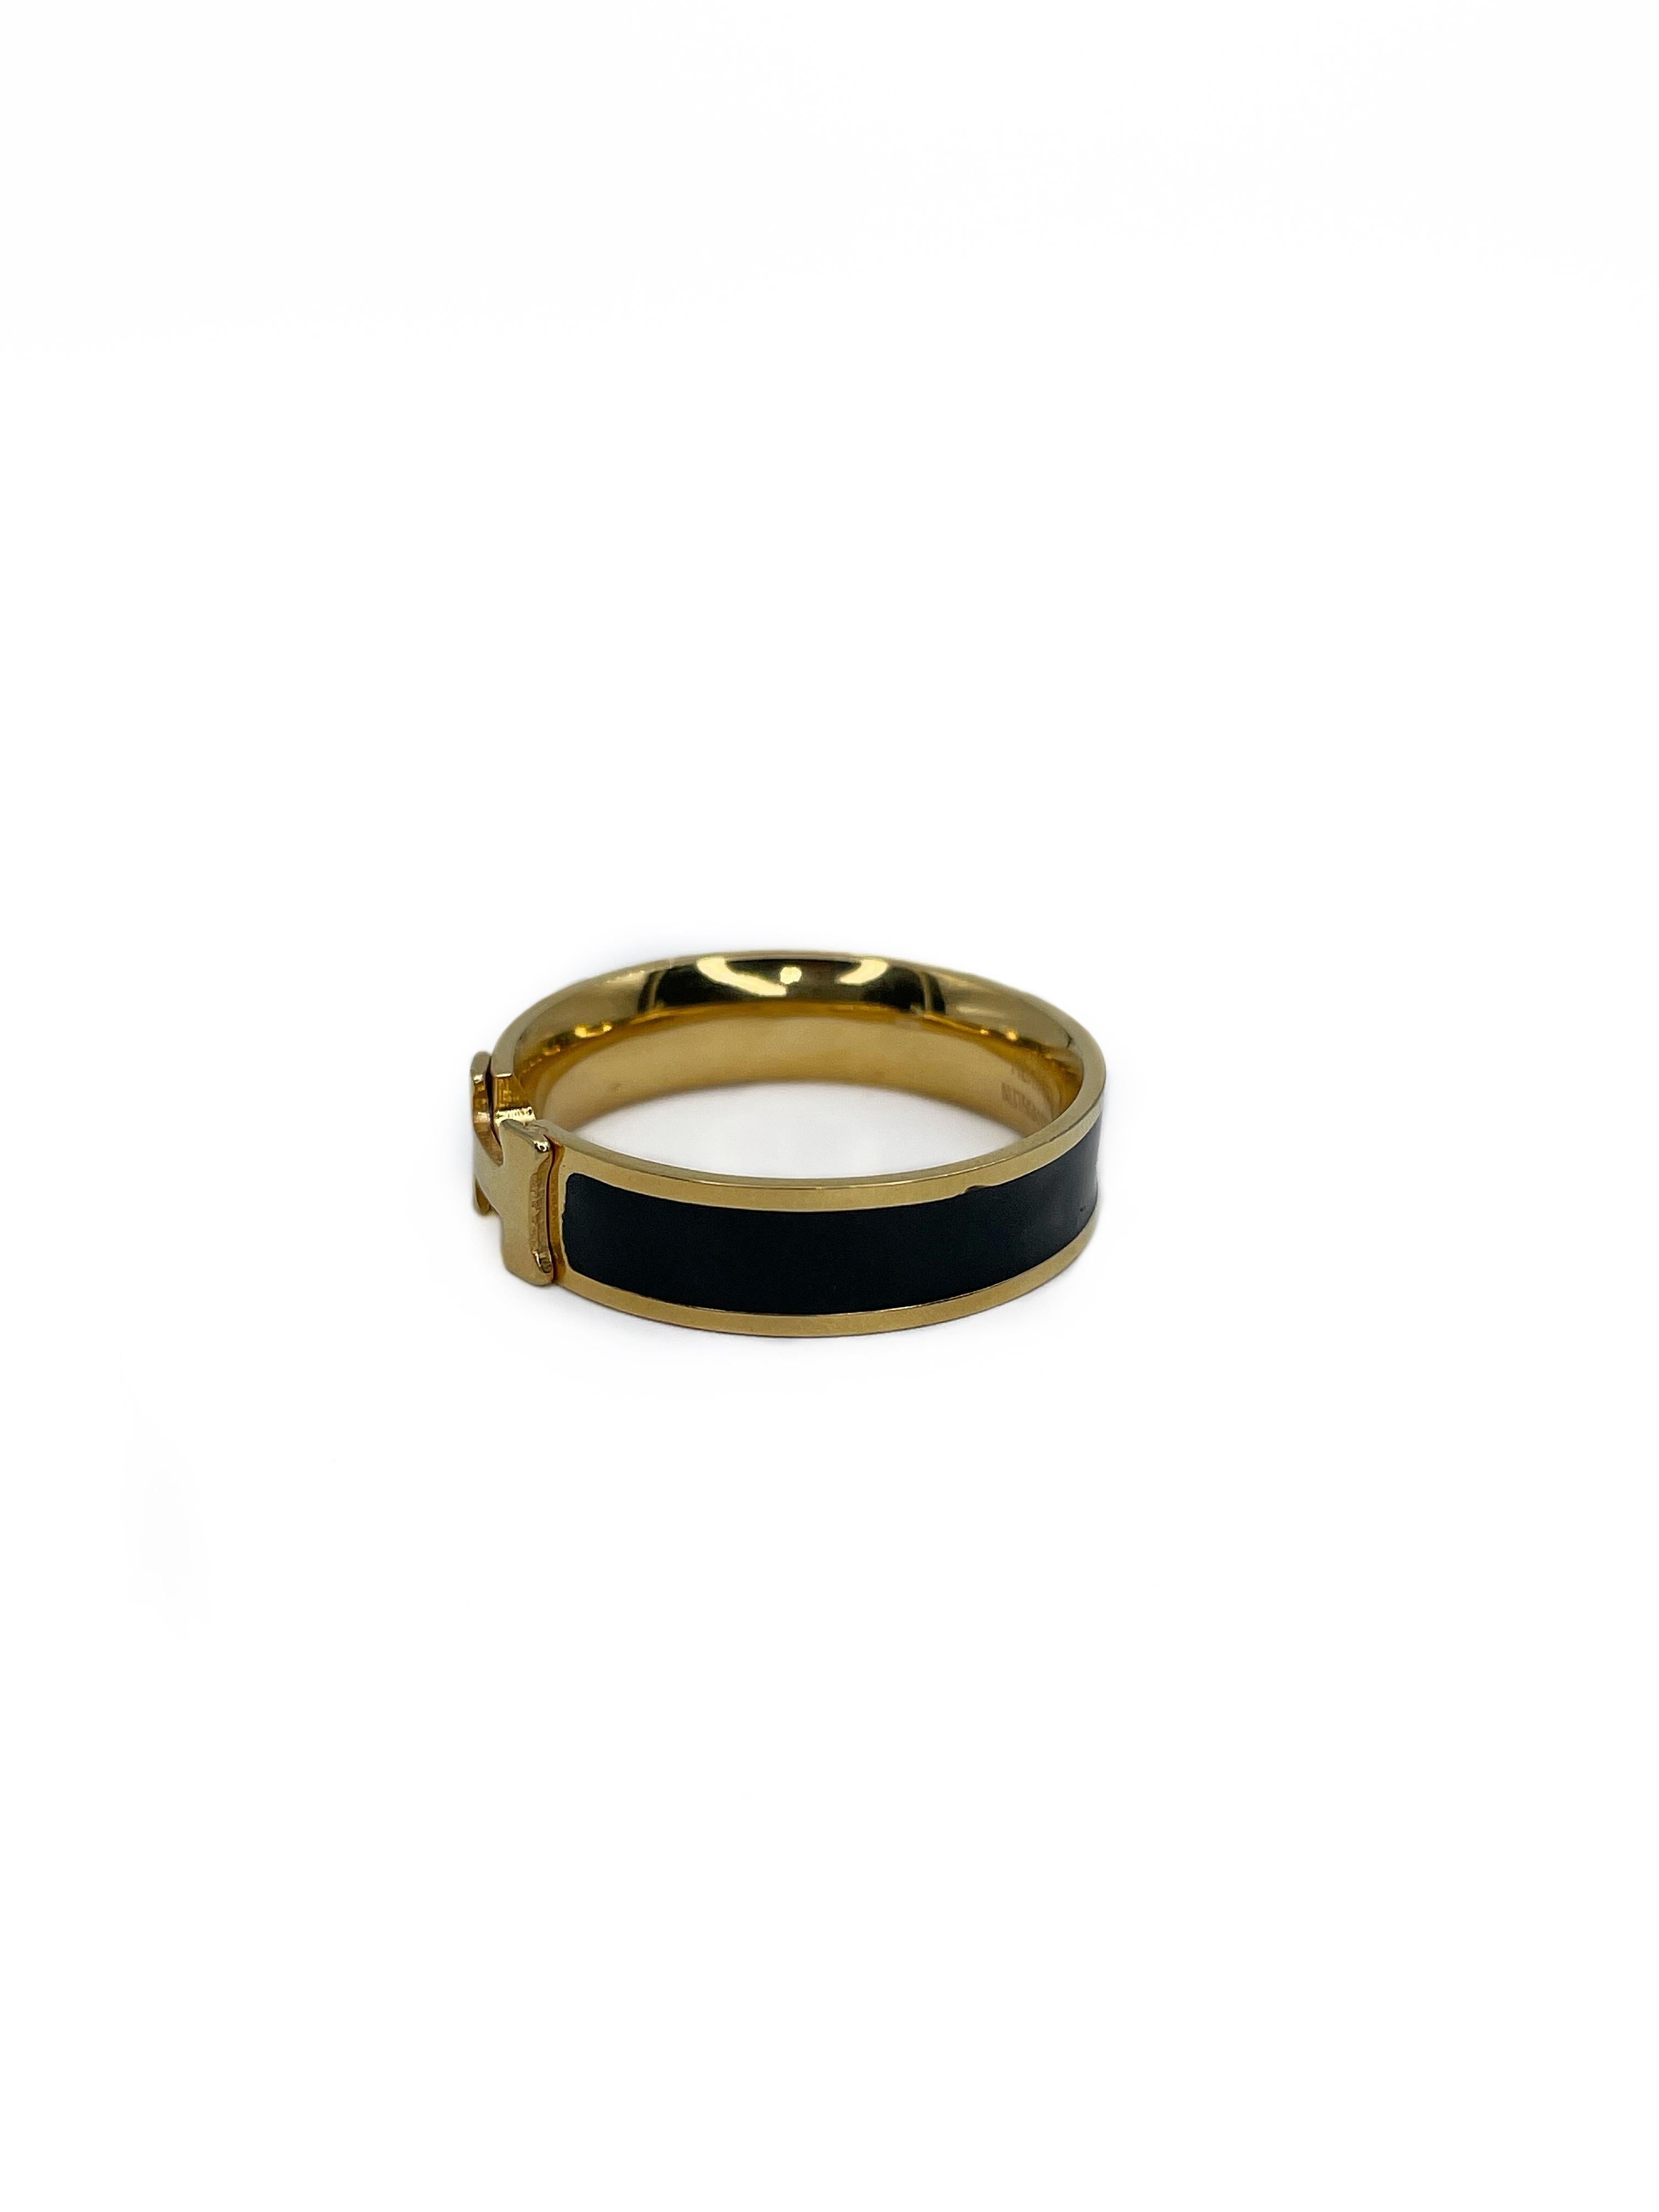 This is a fabulous vintage Hermès logo ring crafted in 18K yellow gold. It is adorned with black enamel that is in perfect condition.

Signature: “Hermès”
Serial number: AU750A102789 (Shown in photos) 

Weight: 4.62g
Size: 20.75 (US11.25)

———

If